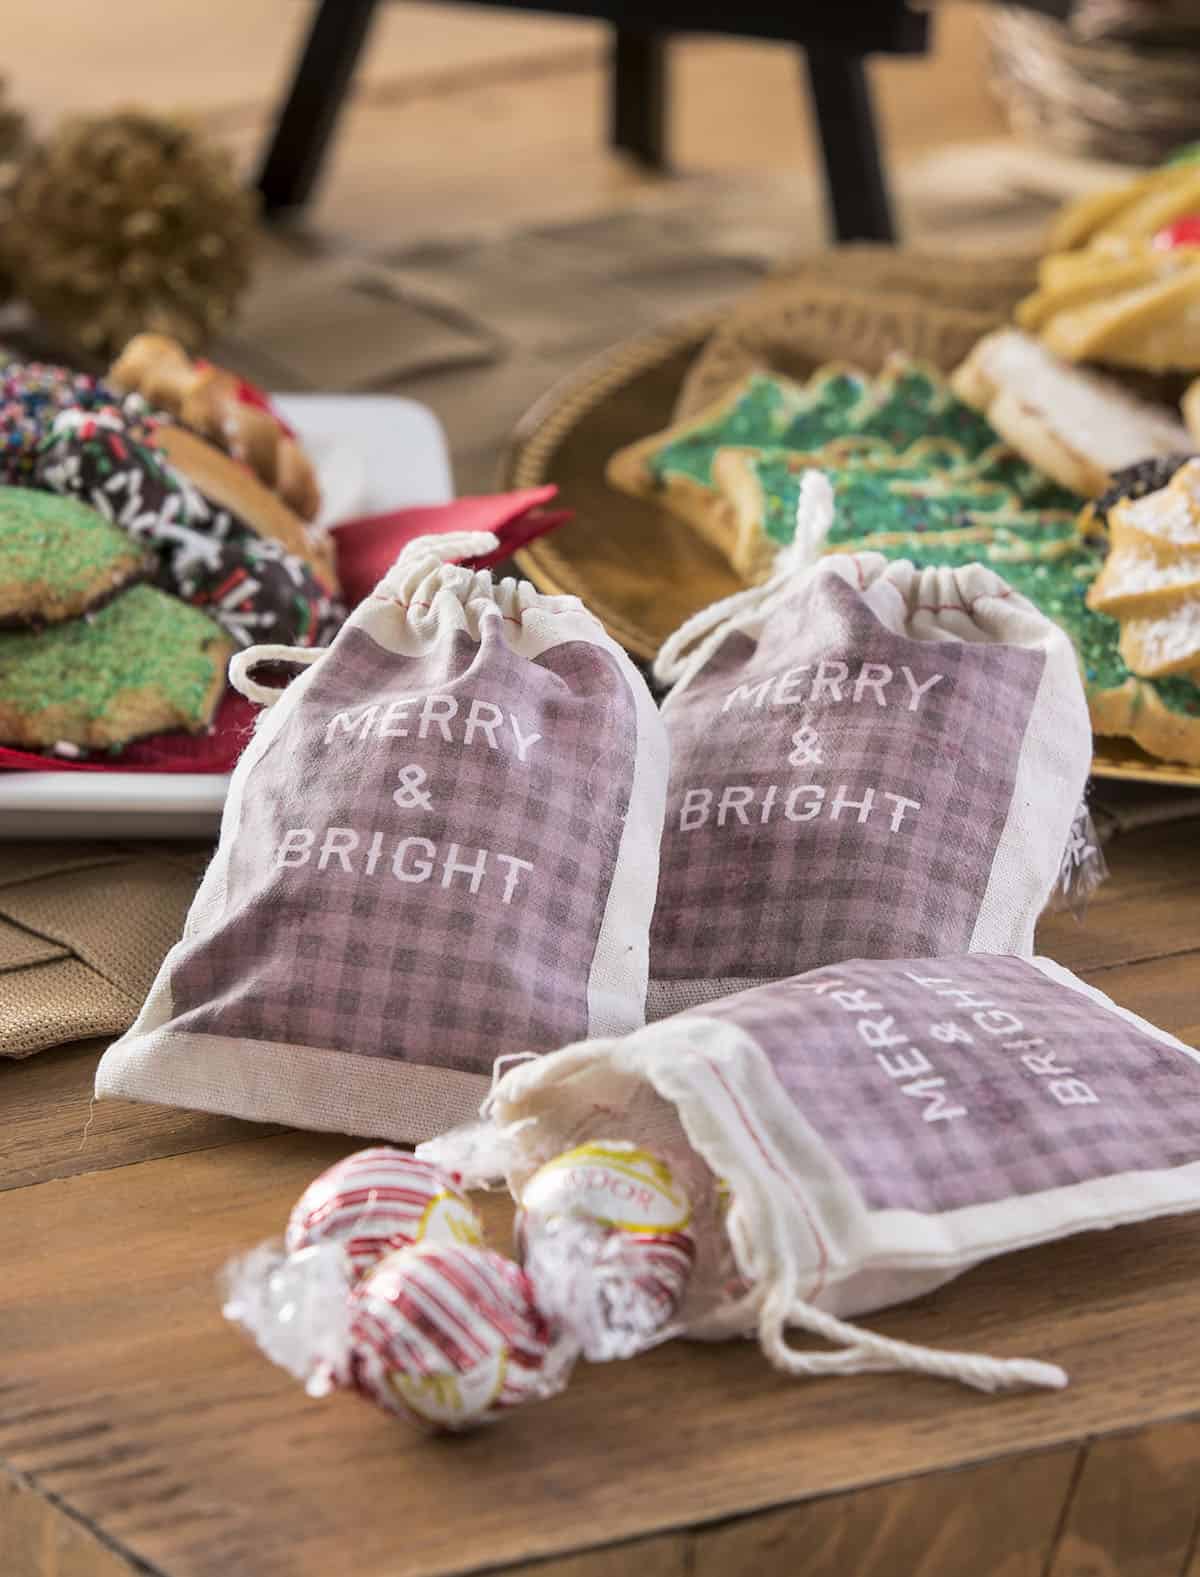 Merry and bright photo transfer favor bags